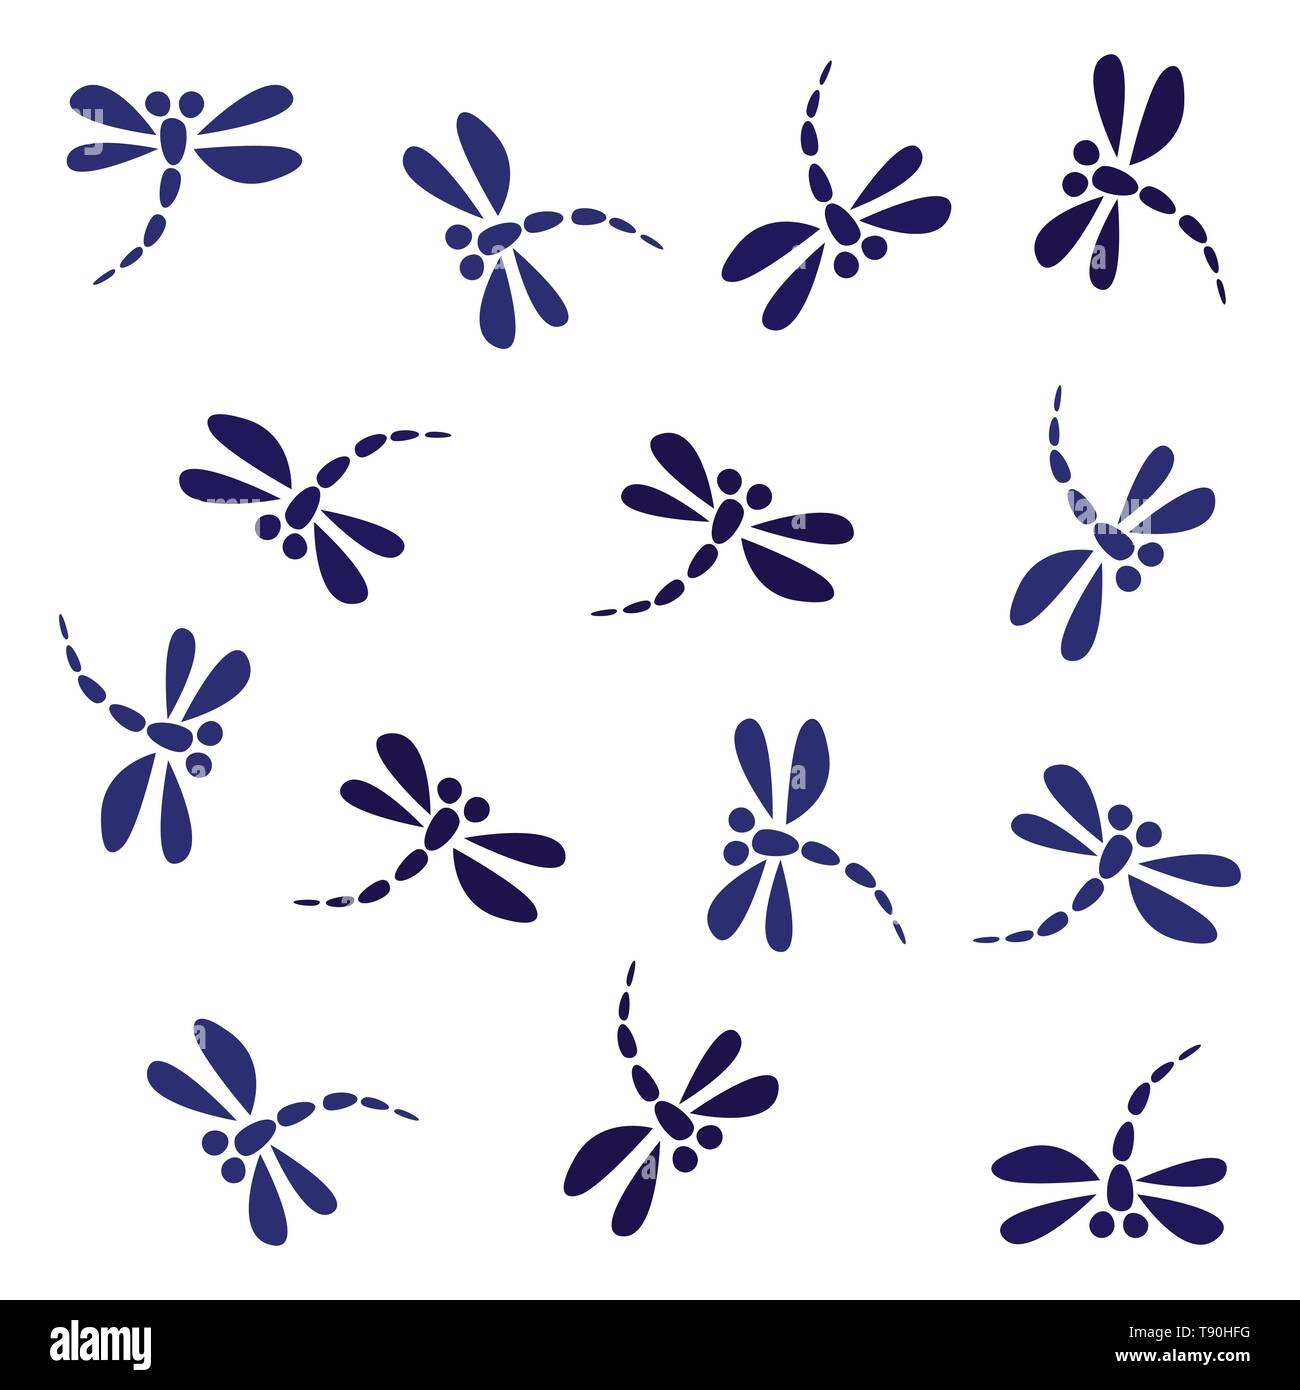 Dragonfly seamless pattern vector. Blue dragonflies on white background. Stock Vector